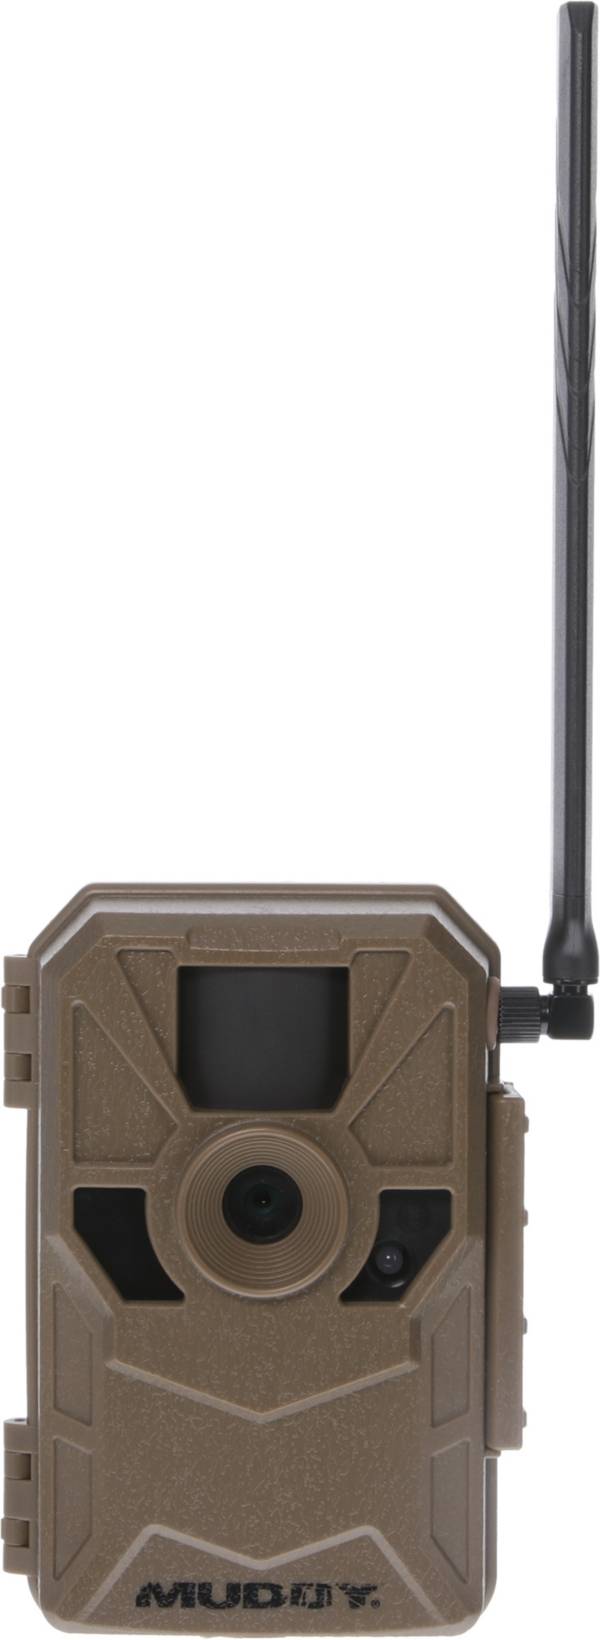 Muddy Outdoors Manifest 2.0 V16 Cellular Trail Camera – 16MP product image